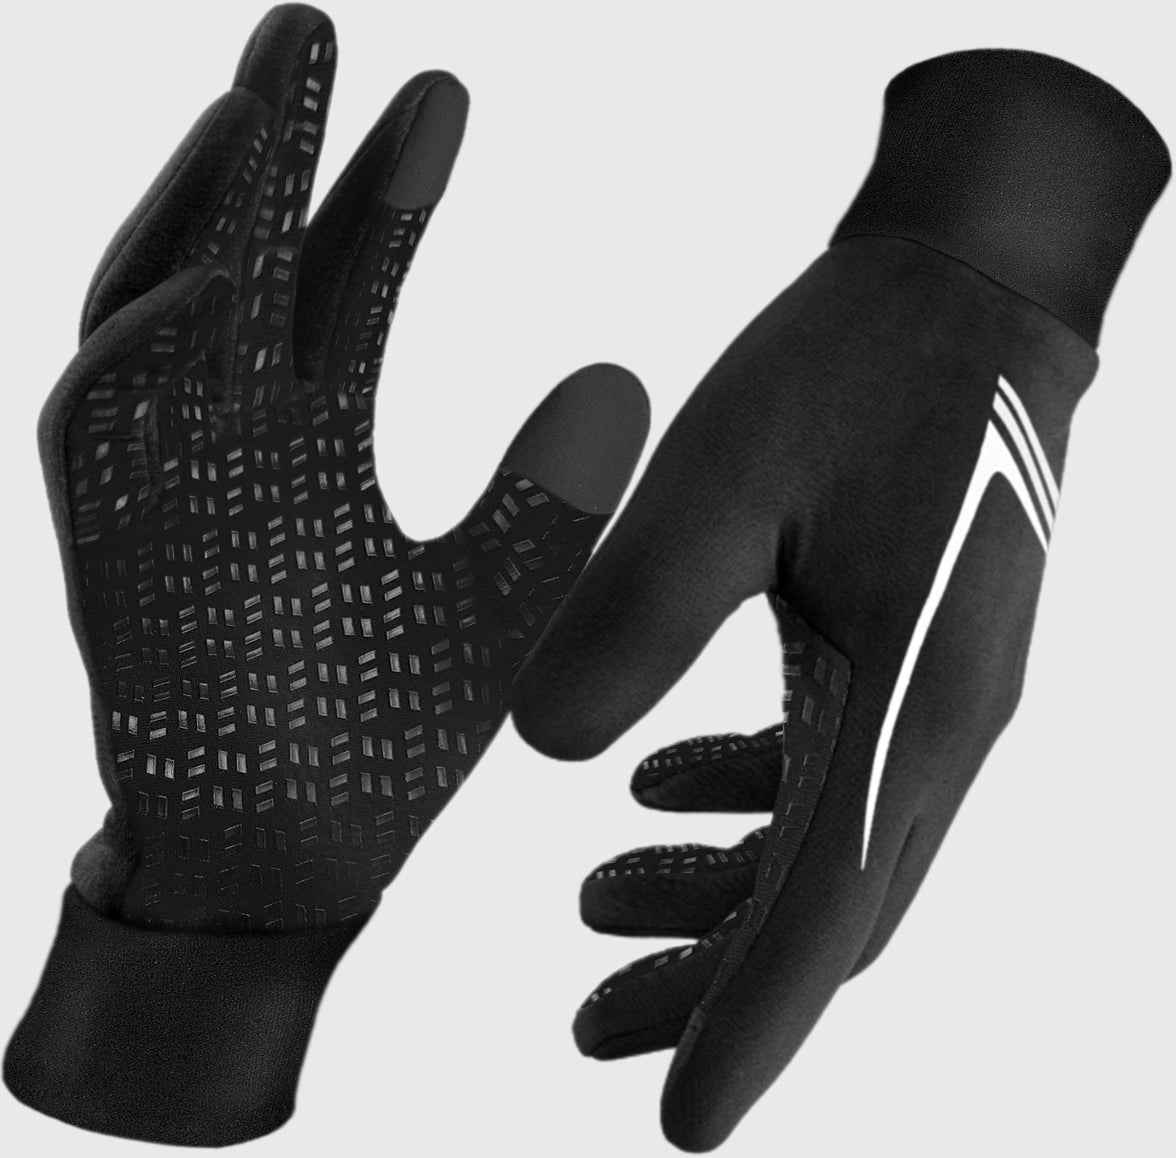 FDX Aero Full Finger Winter Cycling Gloves Gel padded Silicon Gripper Anti Slip Reflective Details Long Cuffs UK